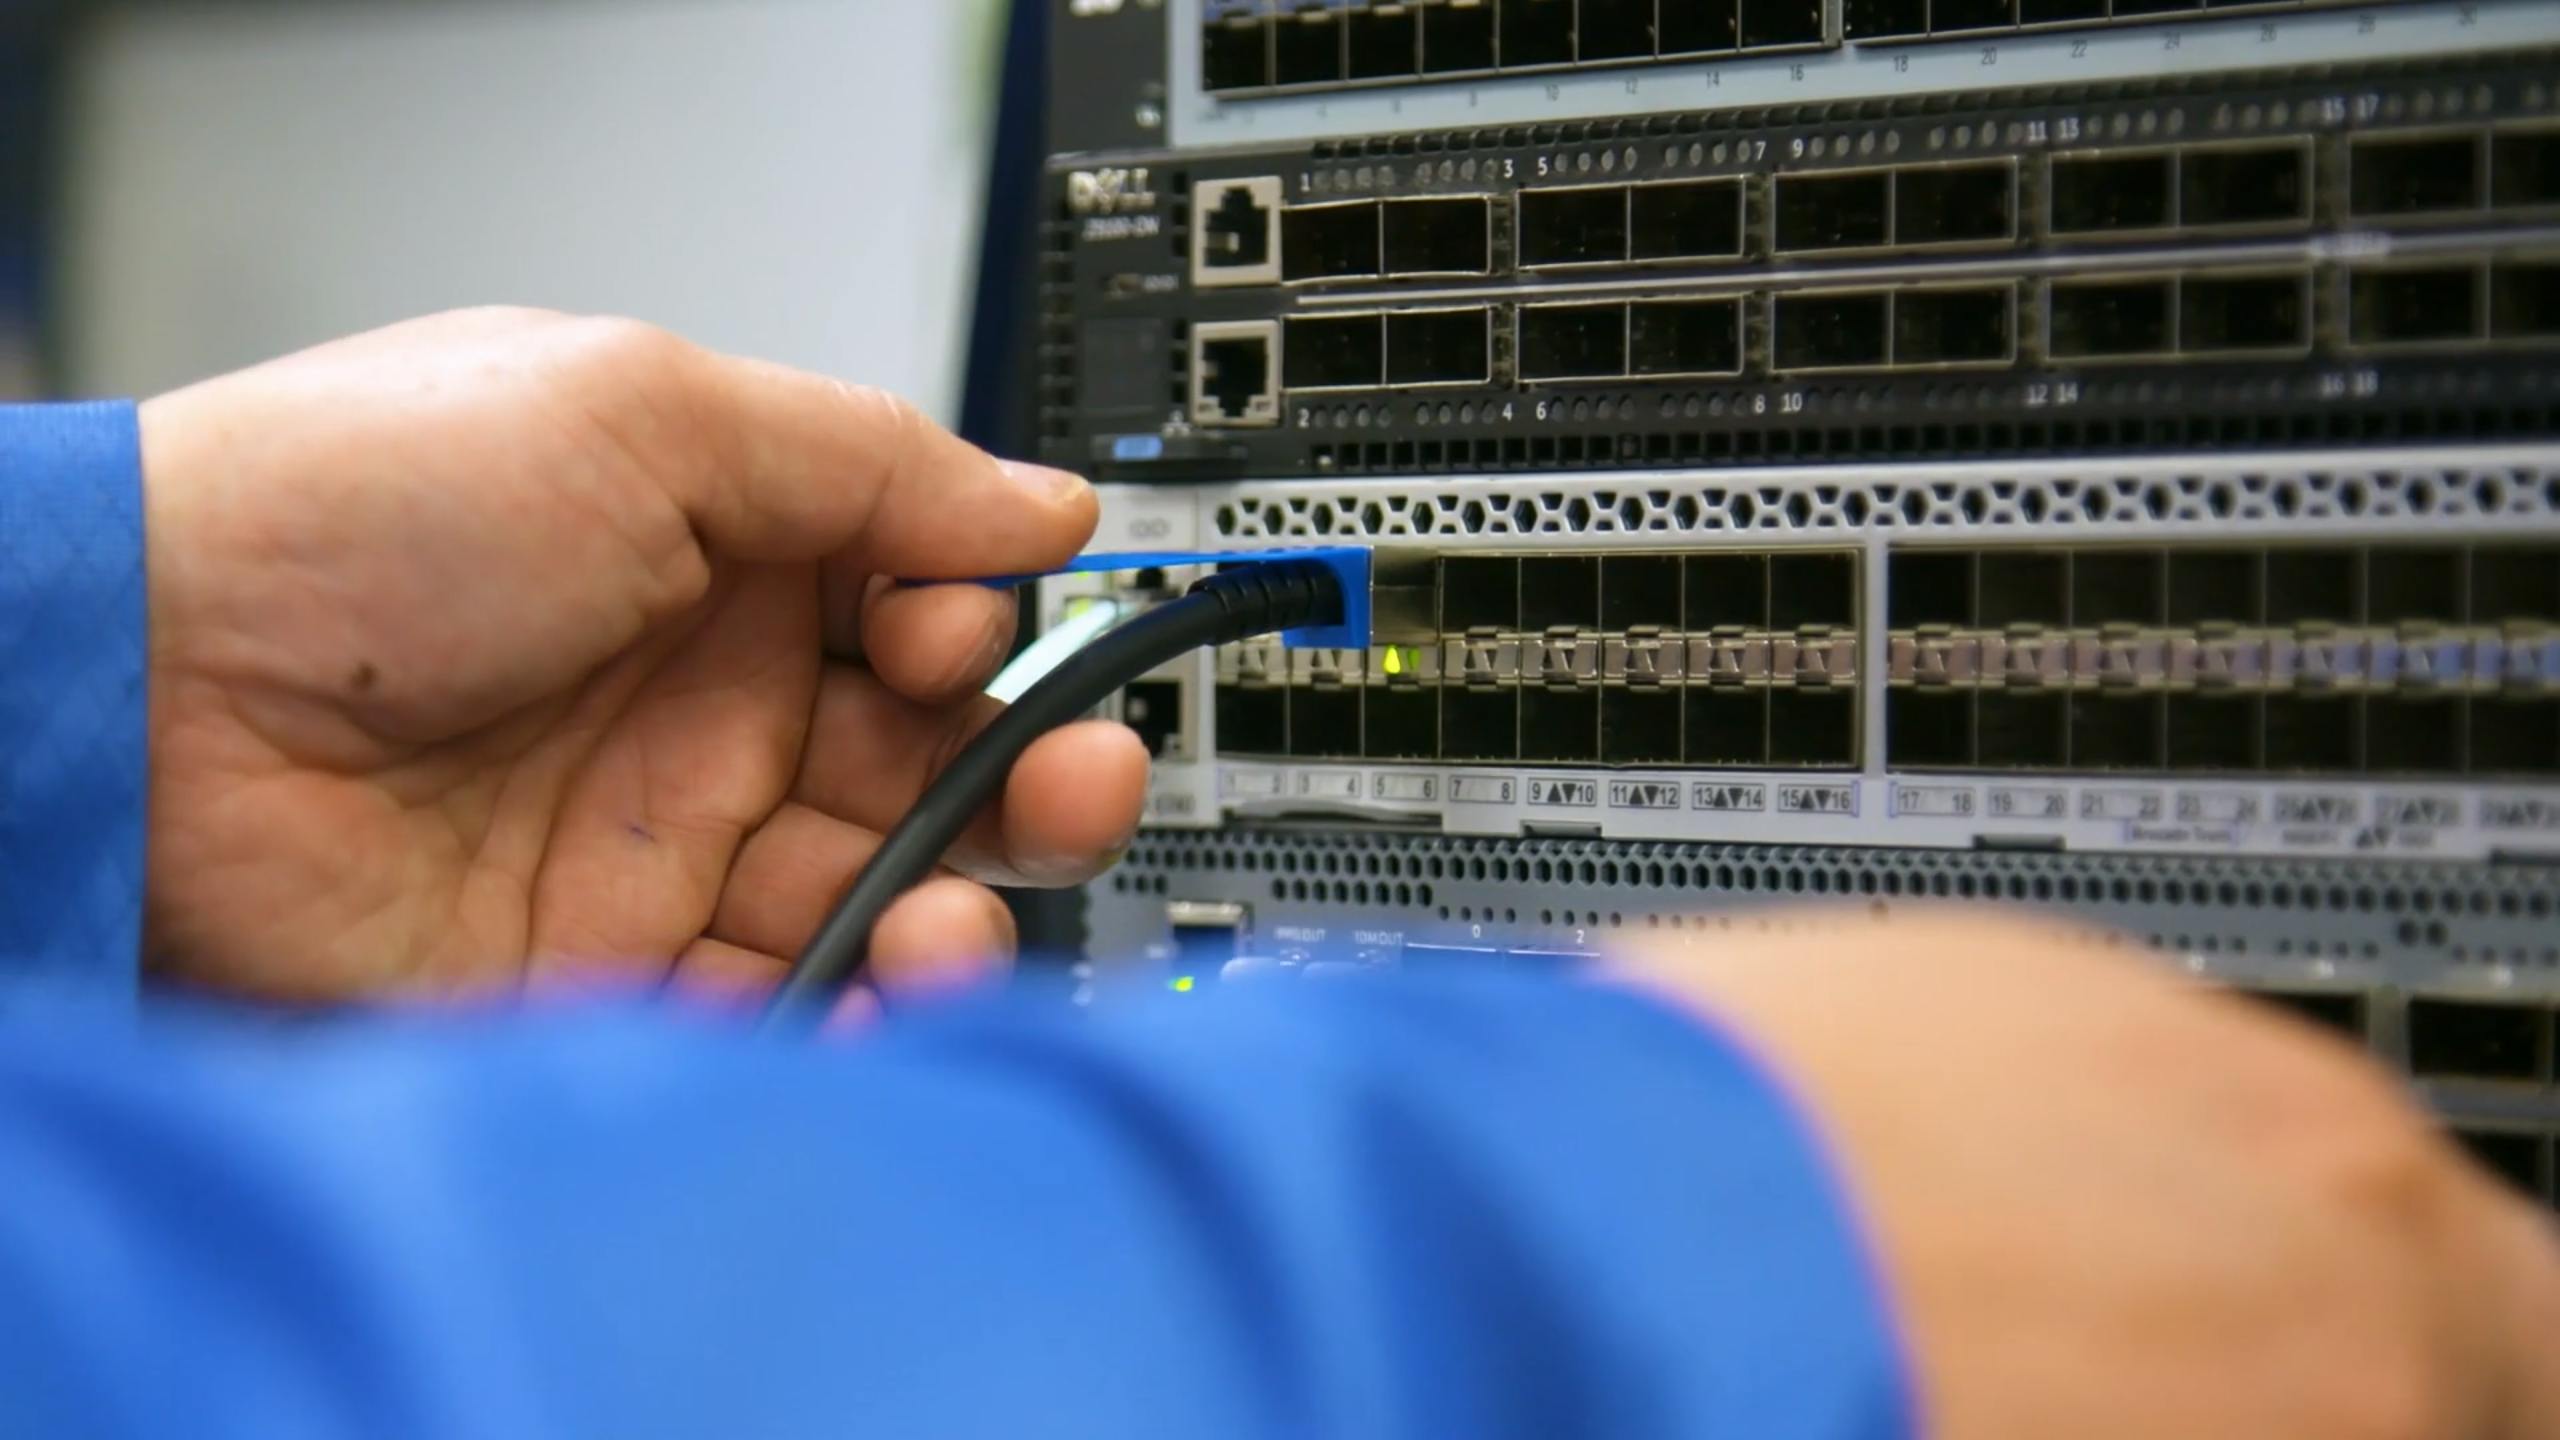 AddOn networks delivering reliable American made networking infrastructure.